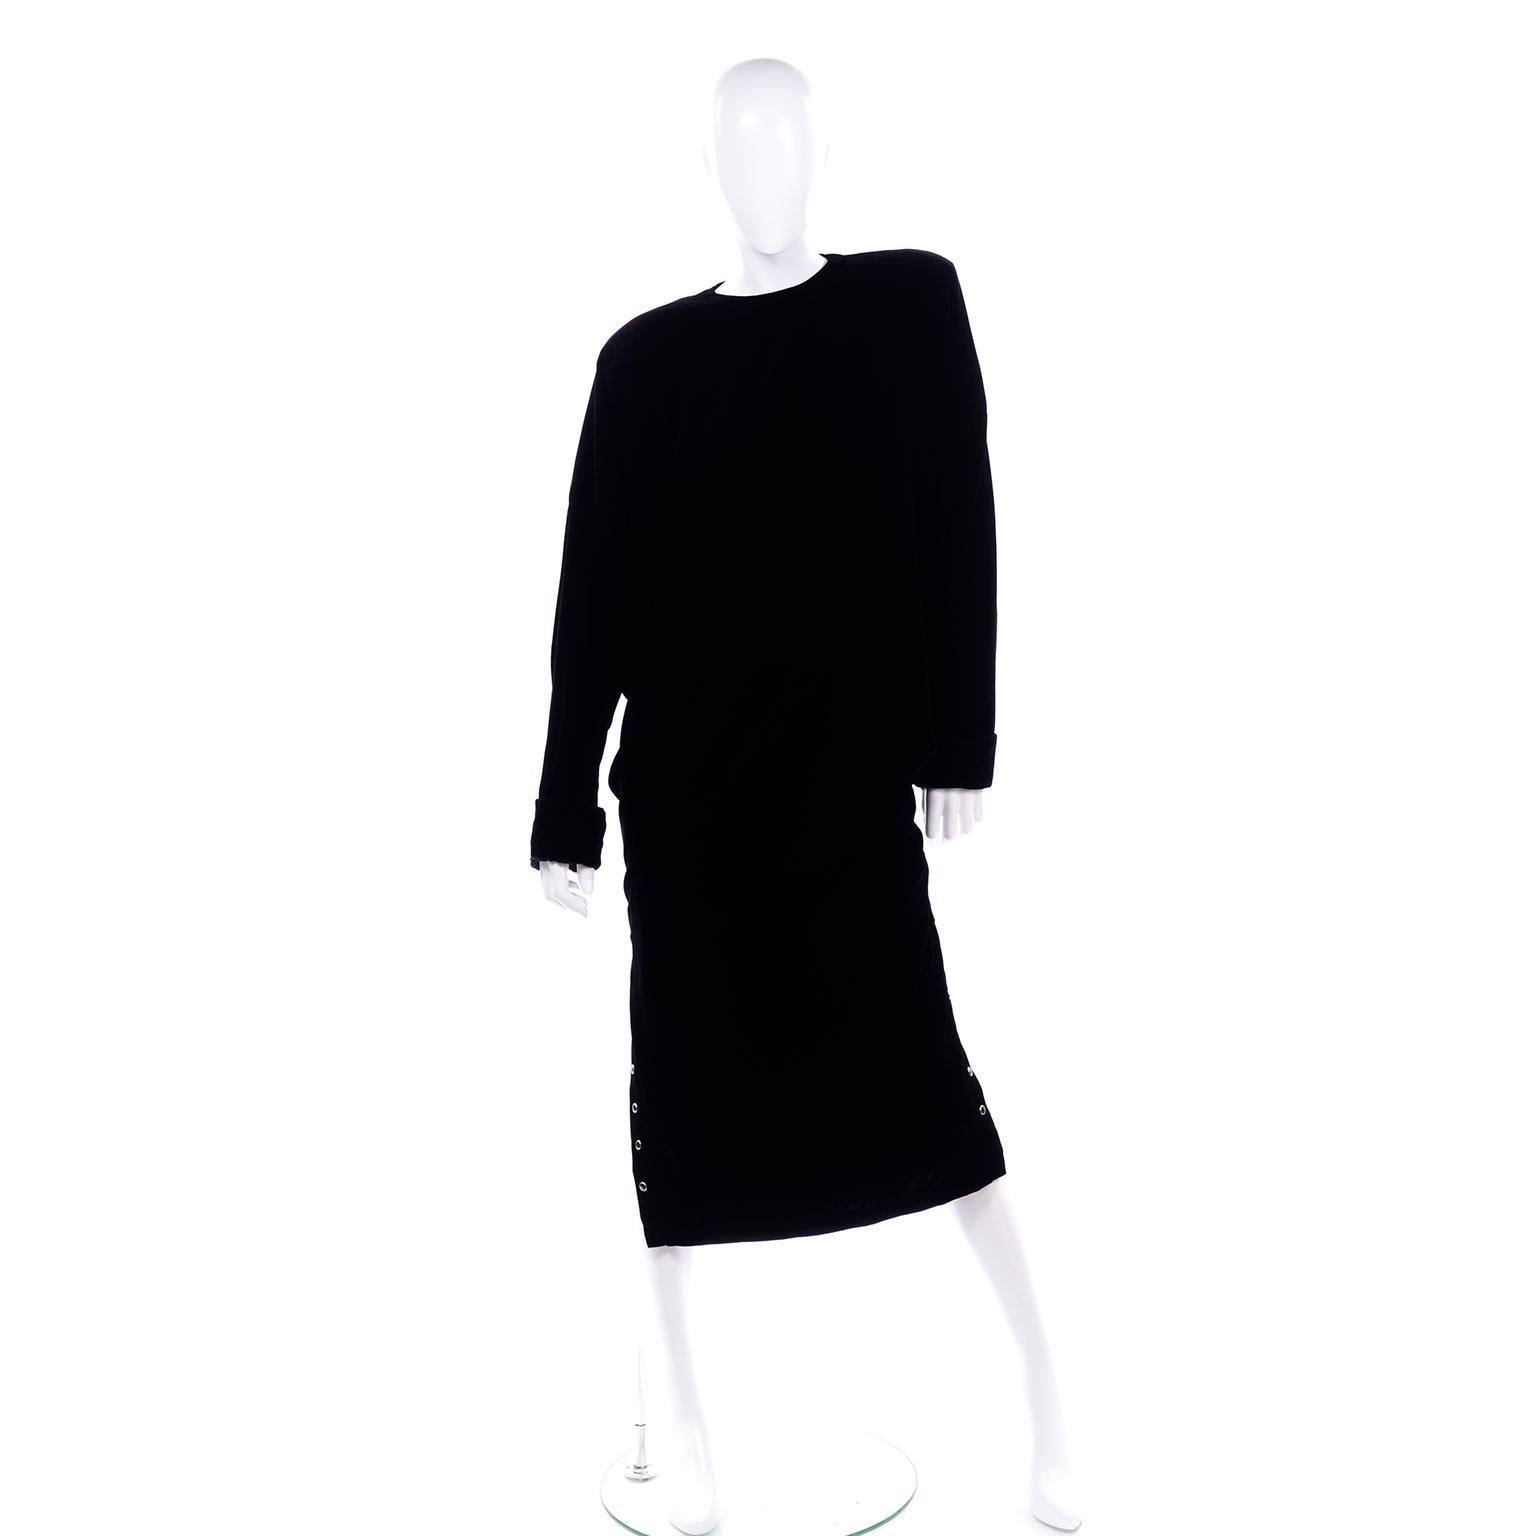 Our obsession with Norma Kamali continues with this fabulous vintage  1980's  oversized black velvet cozy style evening dress! Norma Kamali was designing athleisure styles before there was a name for them! This outfit has that modified sweatshirt